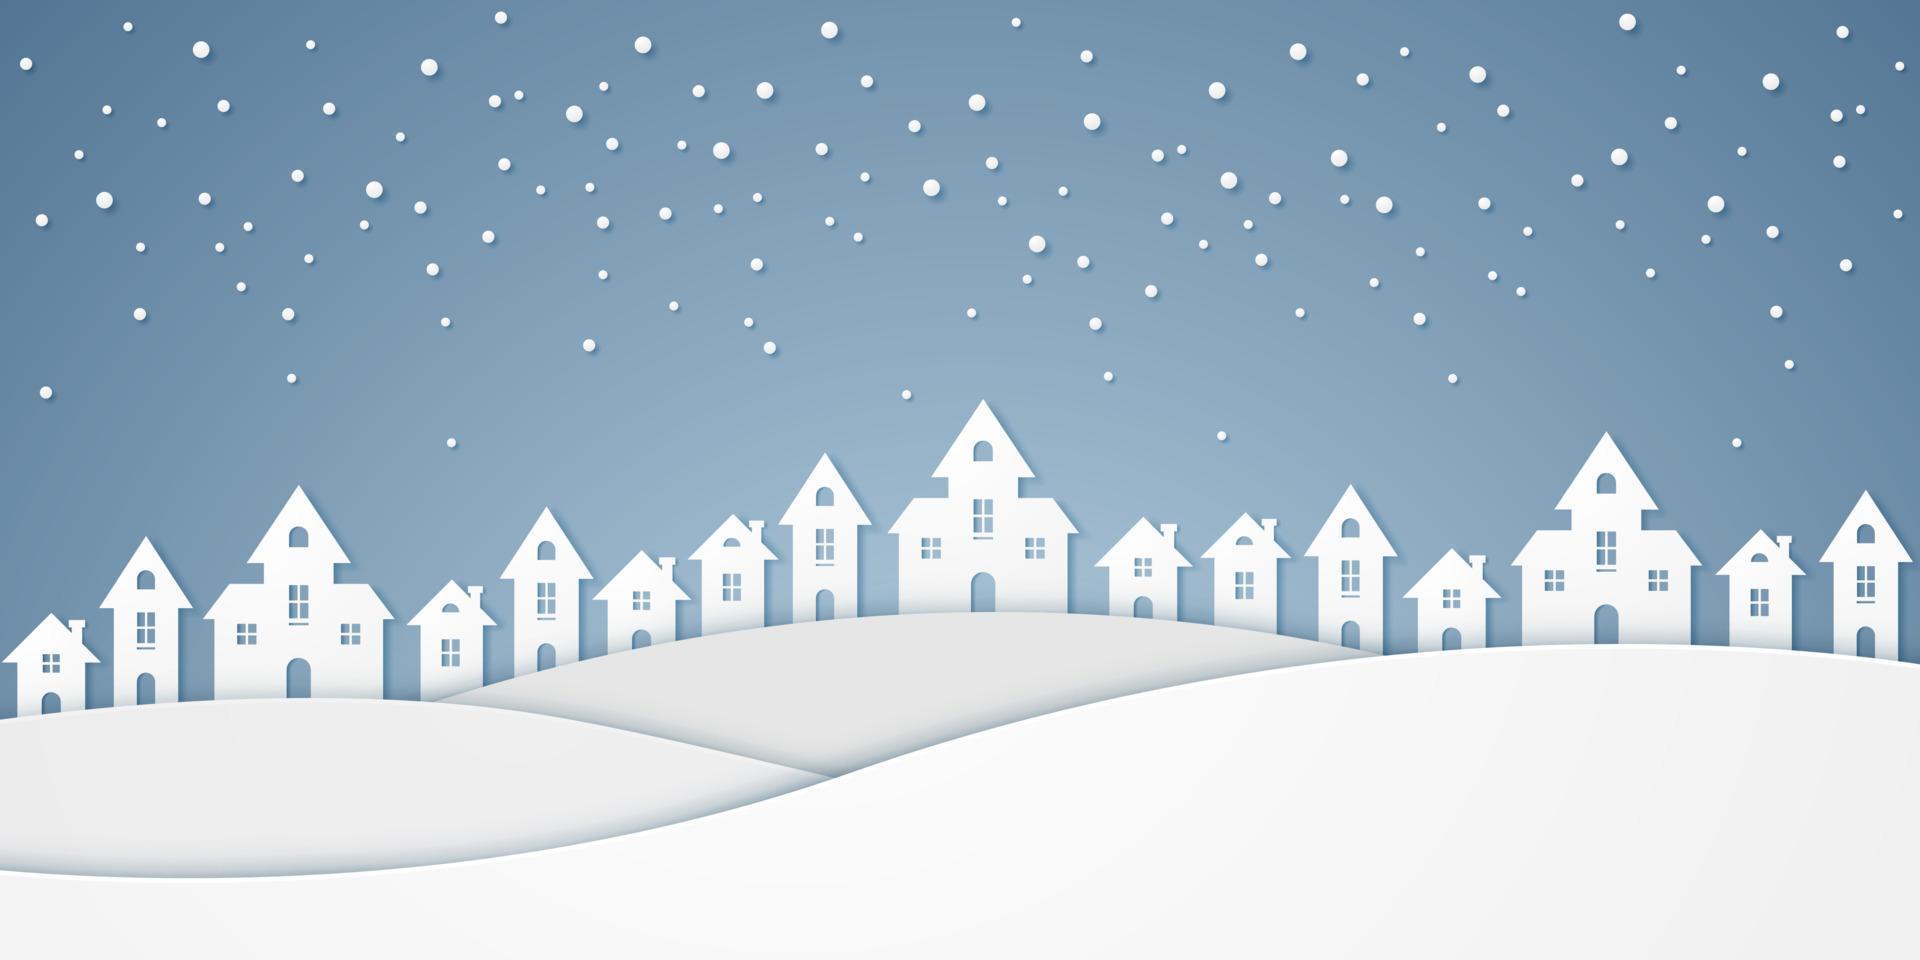 Castle on hill and and snow falling in winter season vector